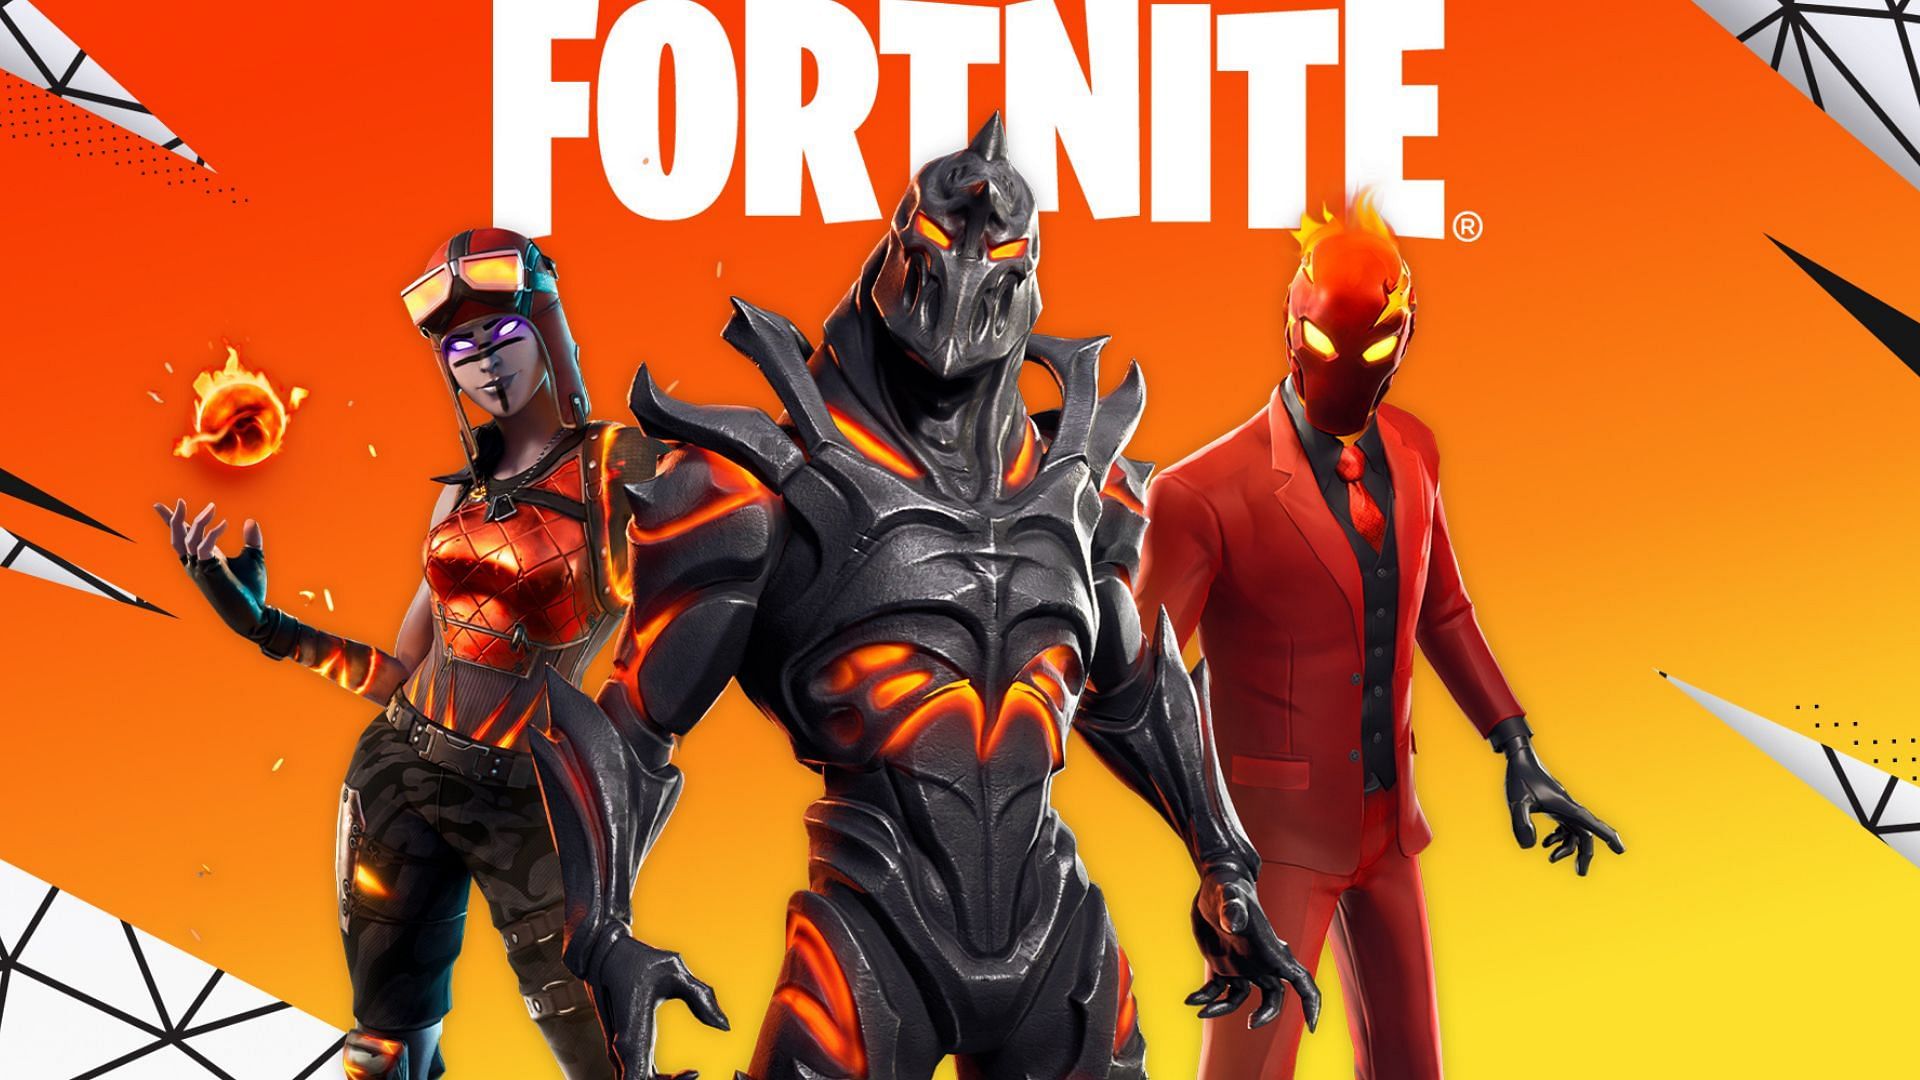 Fortnite Competitive players can look forward to a new season in Arena as free rewards have been added (Image via Epic Games)